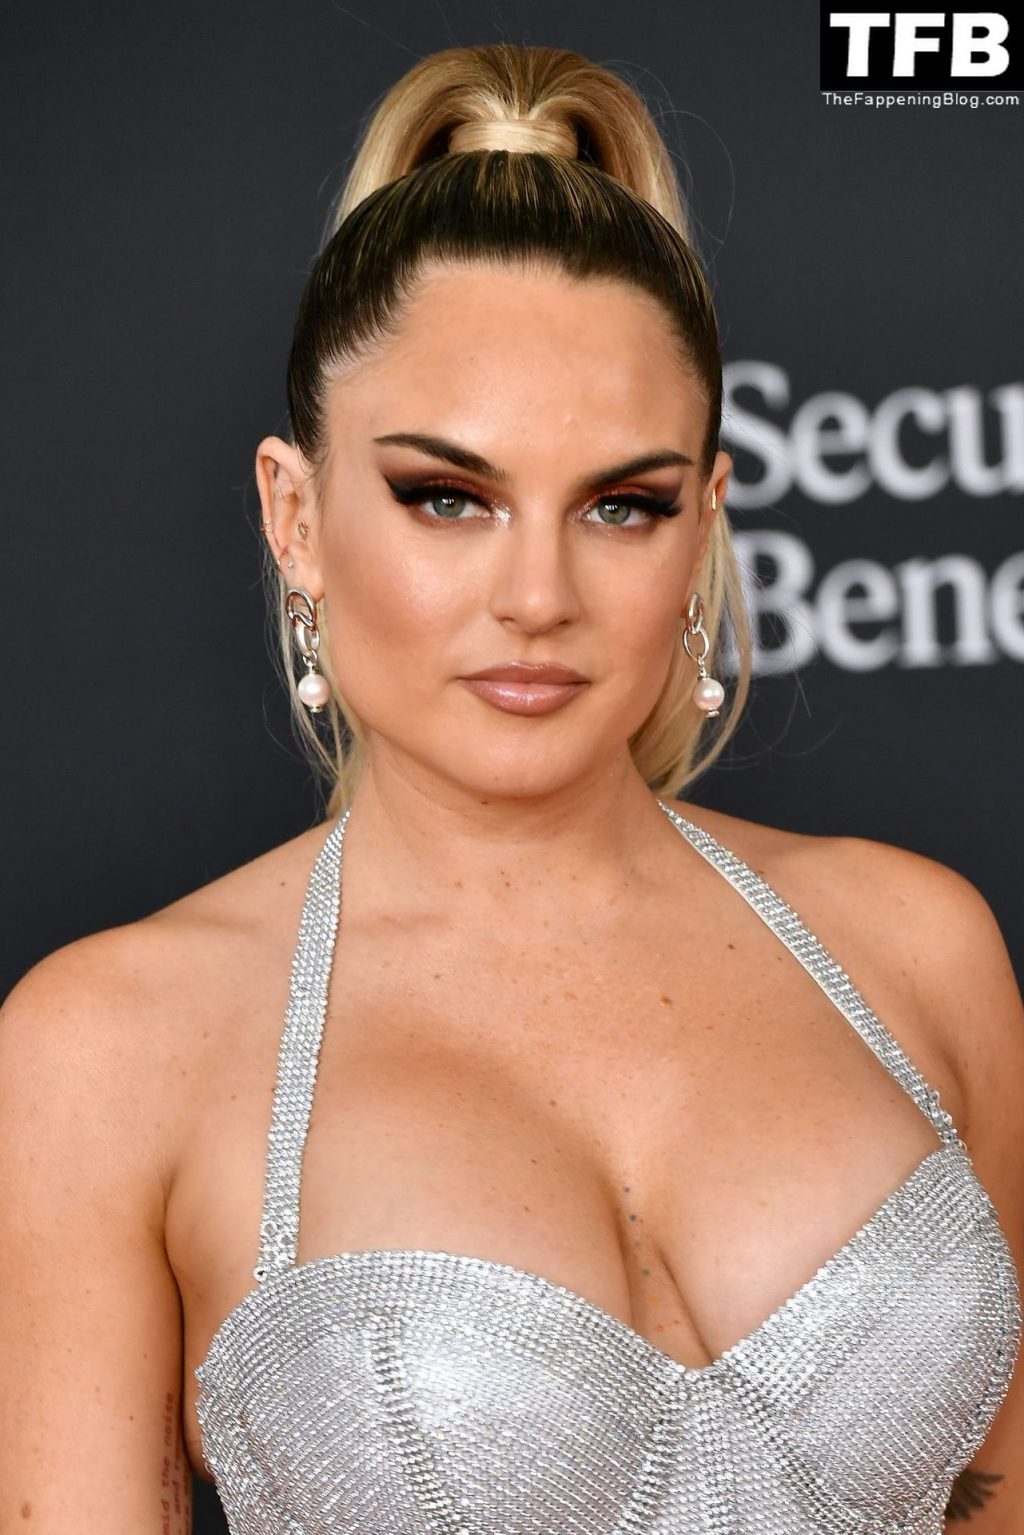 JoJo Teases Her Boobs and Music at the 2021 American Music Awards (42 Photos)